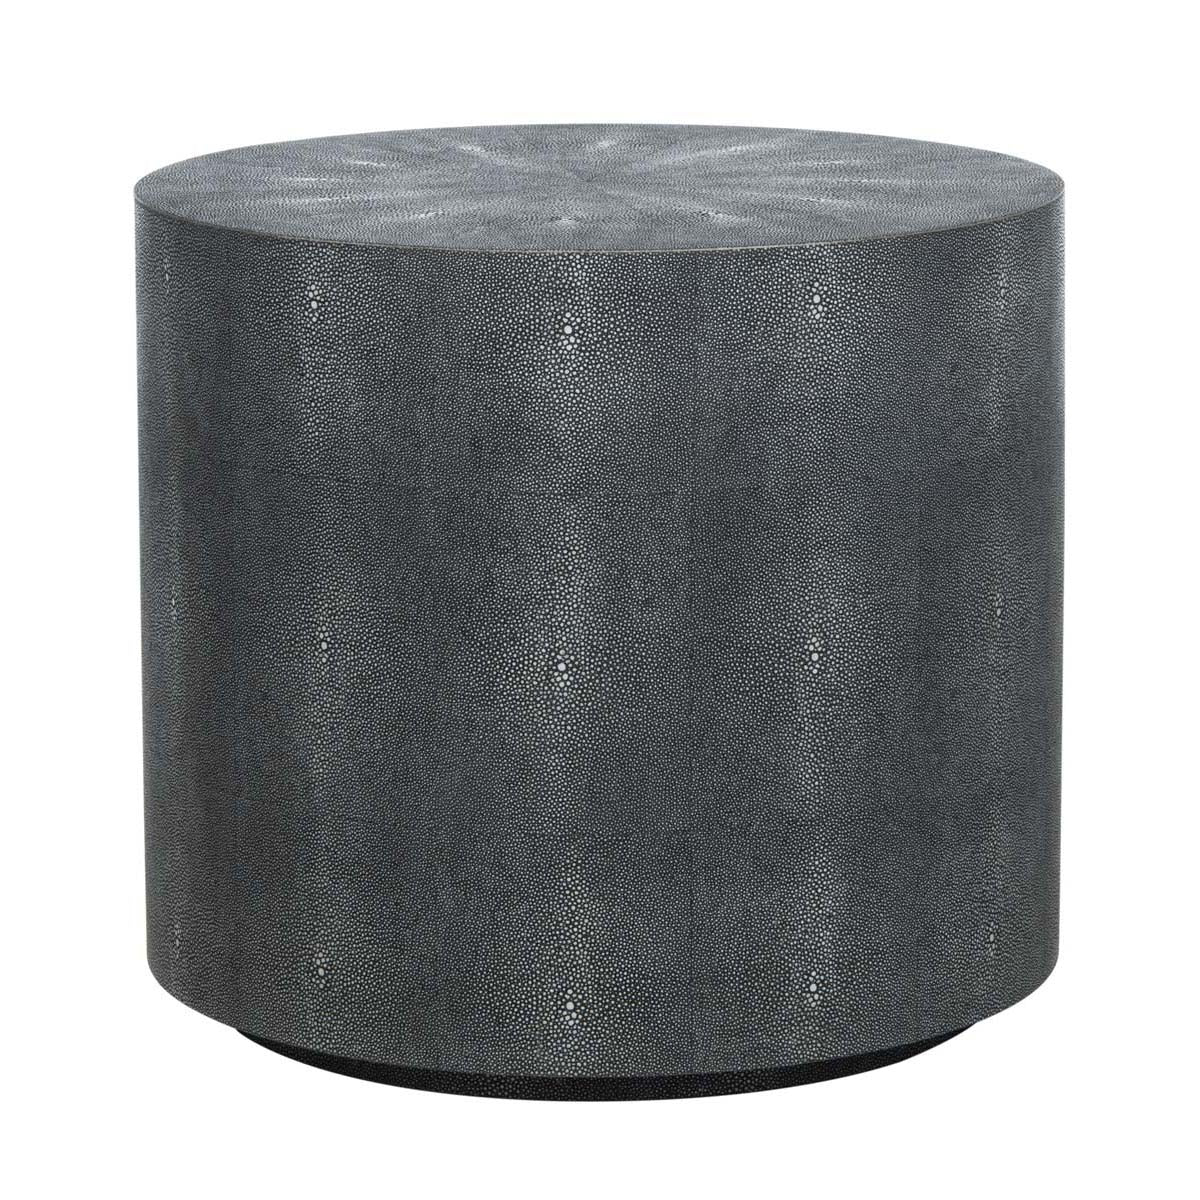 Safavieh Couture Diesel Faux Shagreen End Table - Black